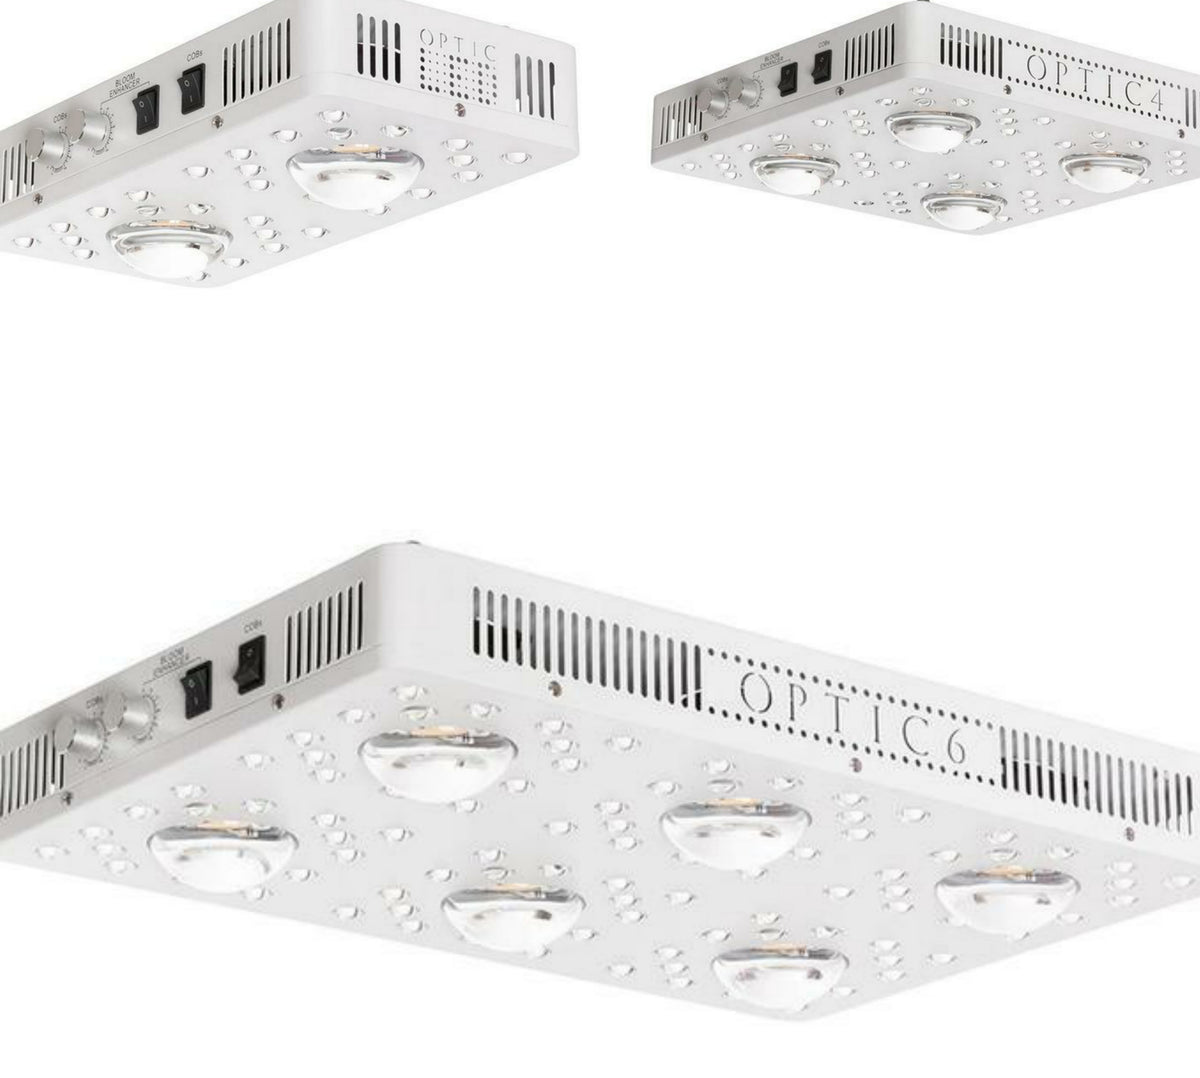 Why Do The Generation 4 Optic Leds Cost More Then Gen 3? — Optic LED